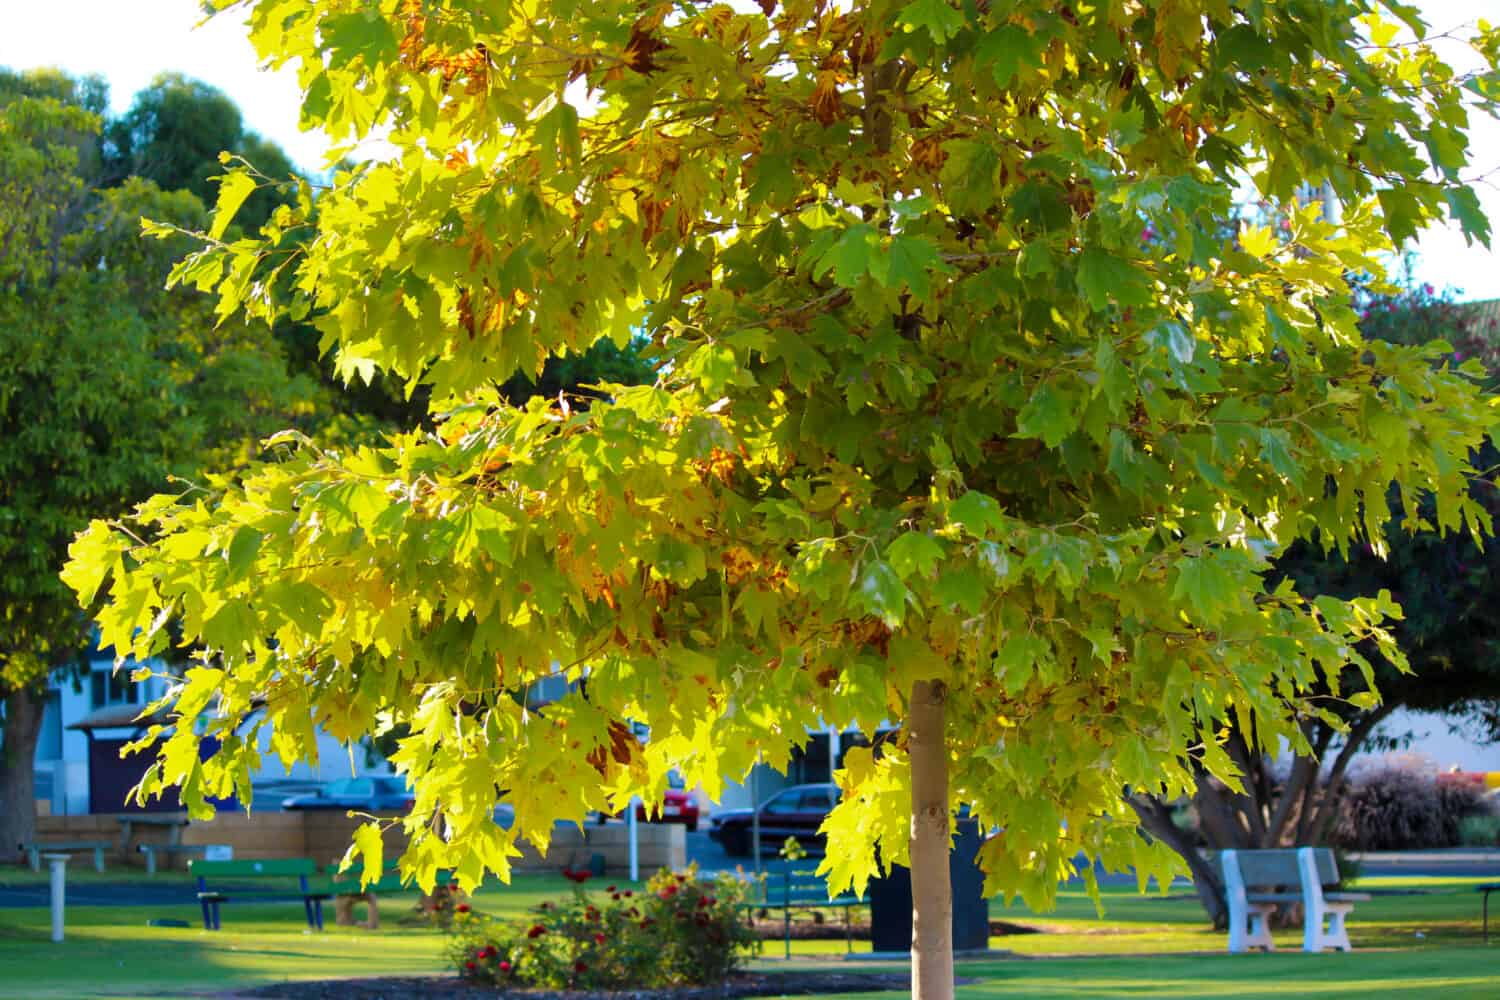 Brilliant red , yellow , brown and green  sycamore Platanus occidentalis foliage of deciduous trees in autumn  add color to the garden and park land scape as the leaves fall to the ground below.